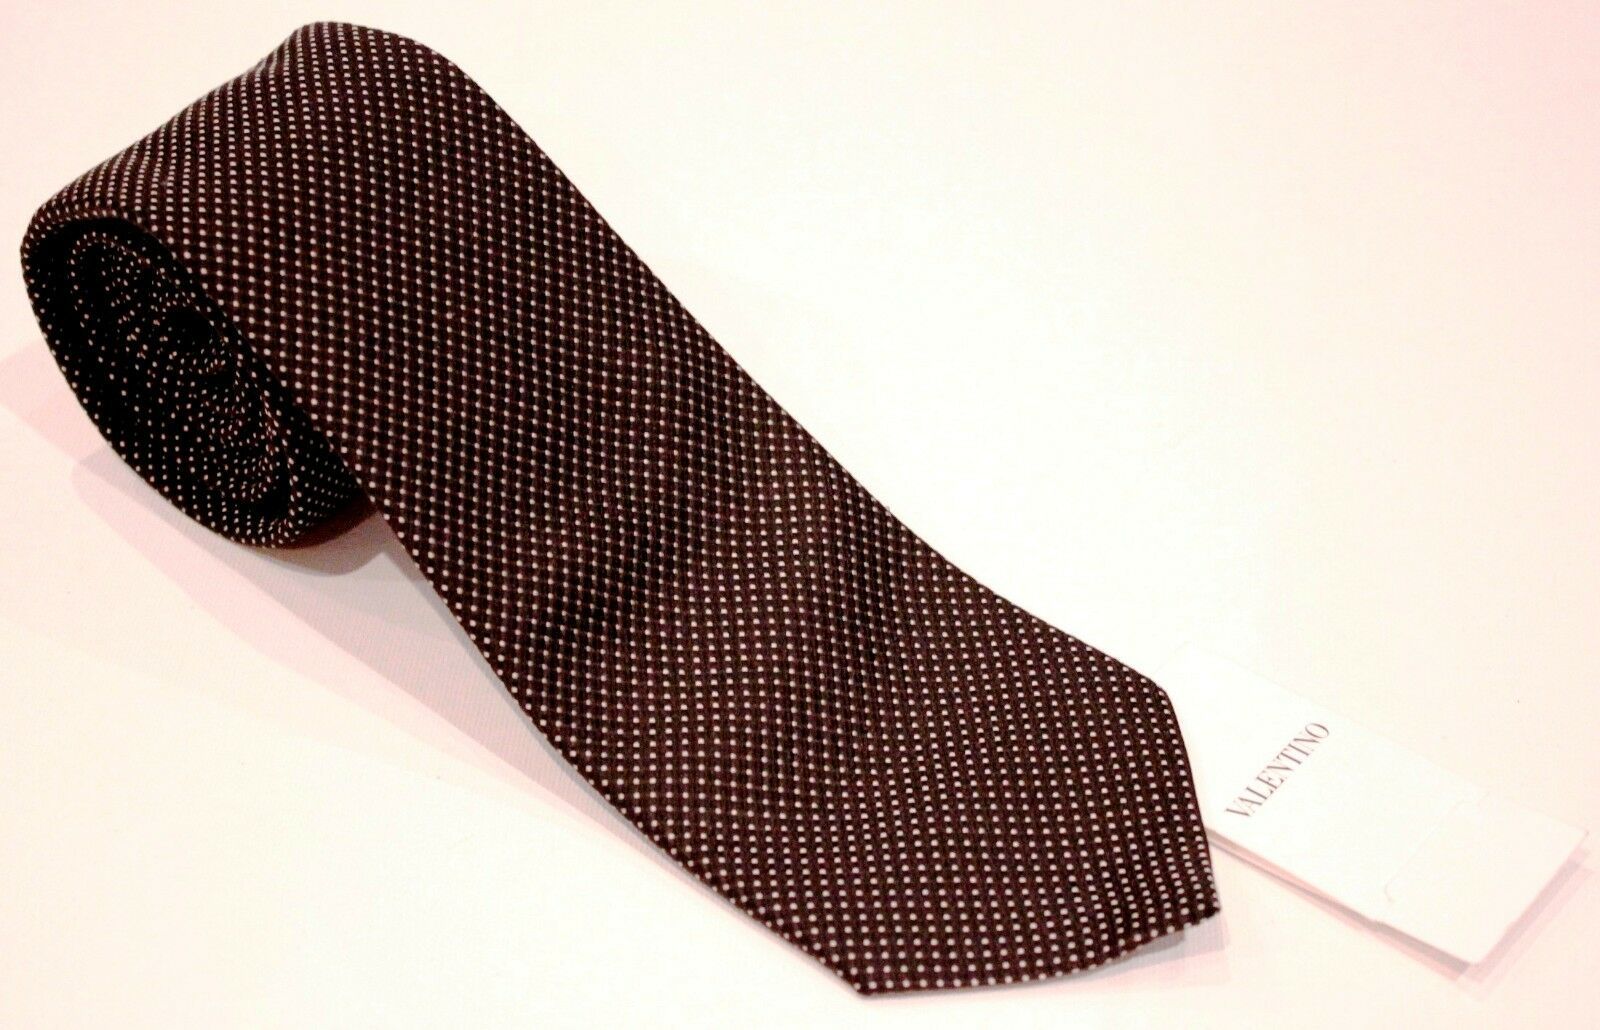 Primary image for VALENTINO Black WHITE Dots Dress SUIT TIE 100% Silk ITALY Free Shipping